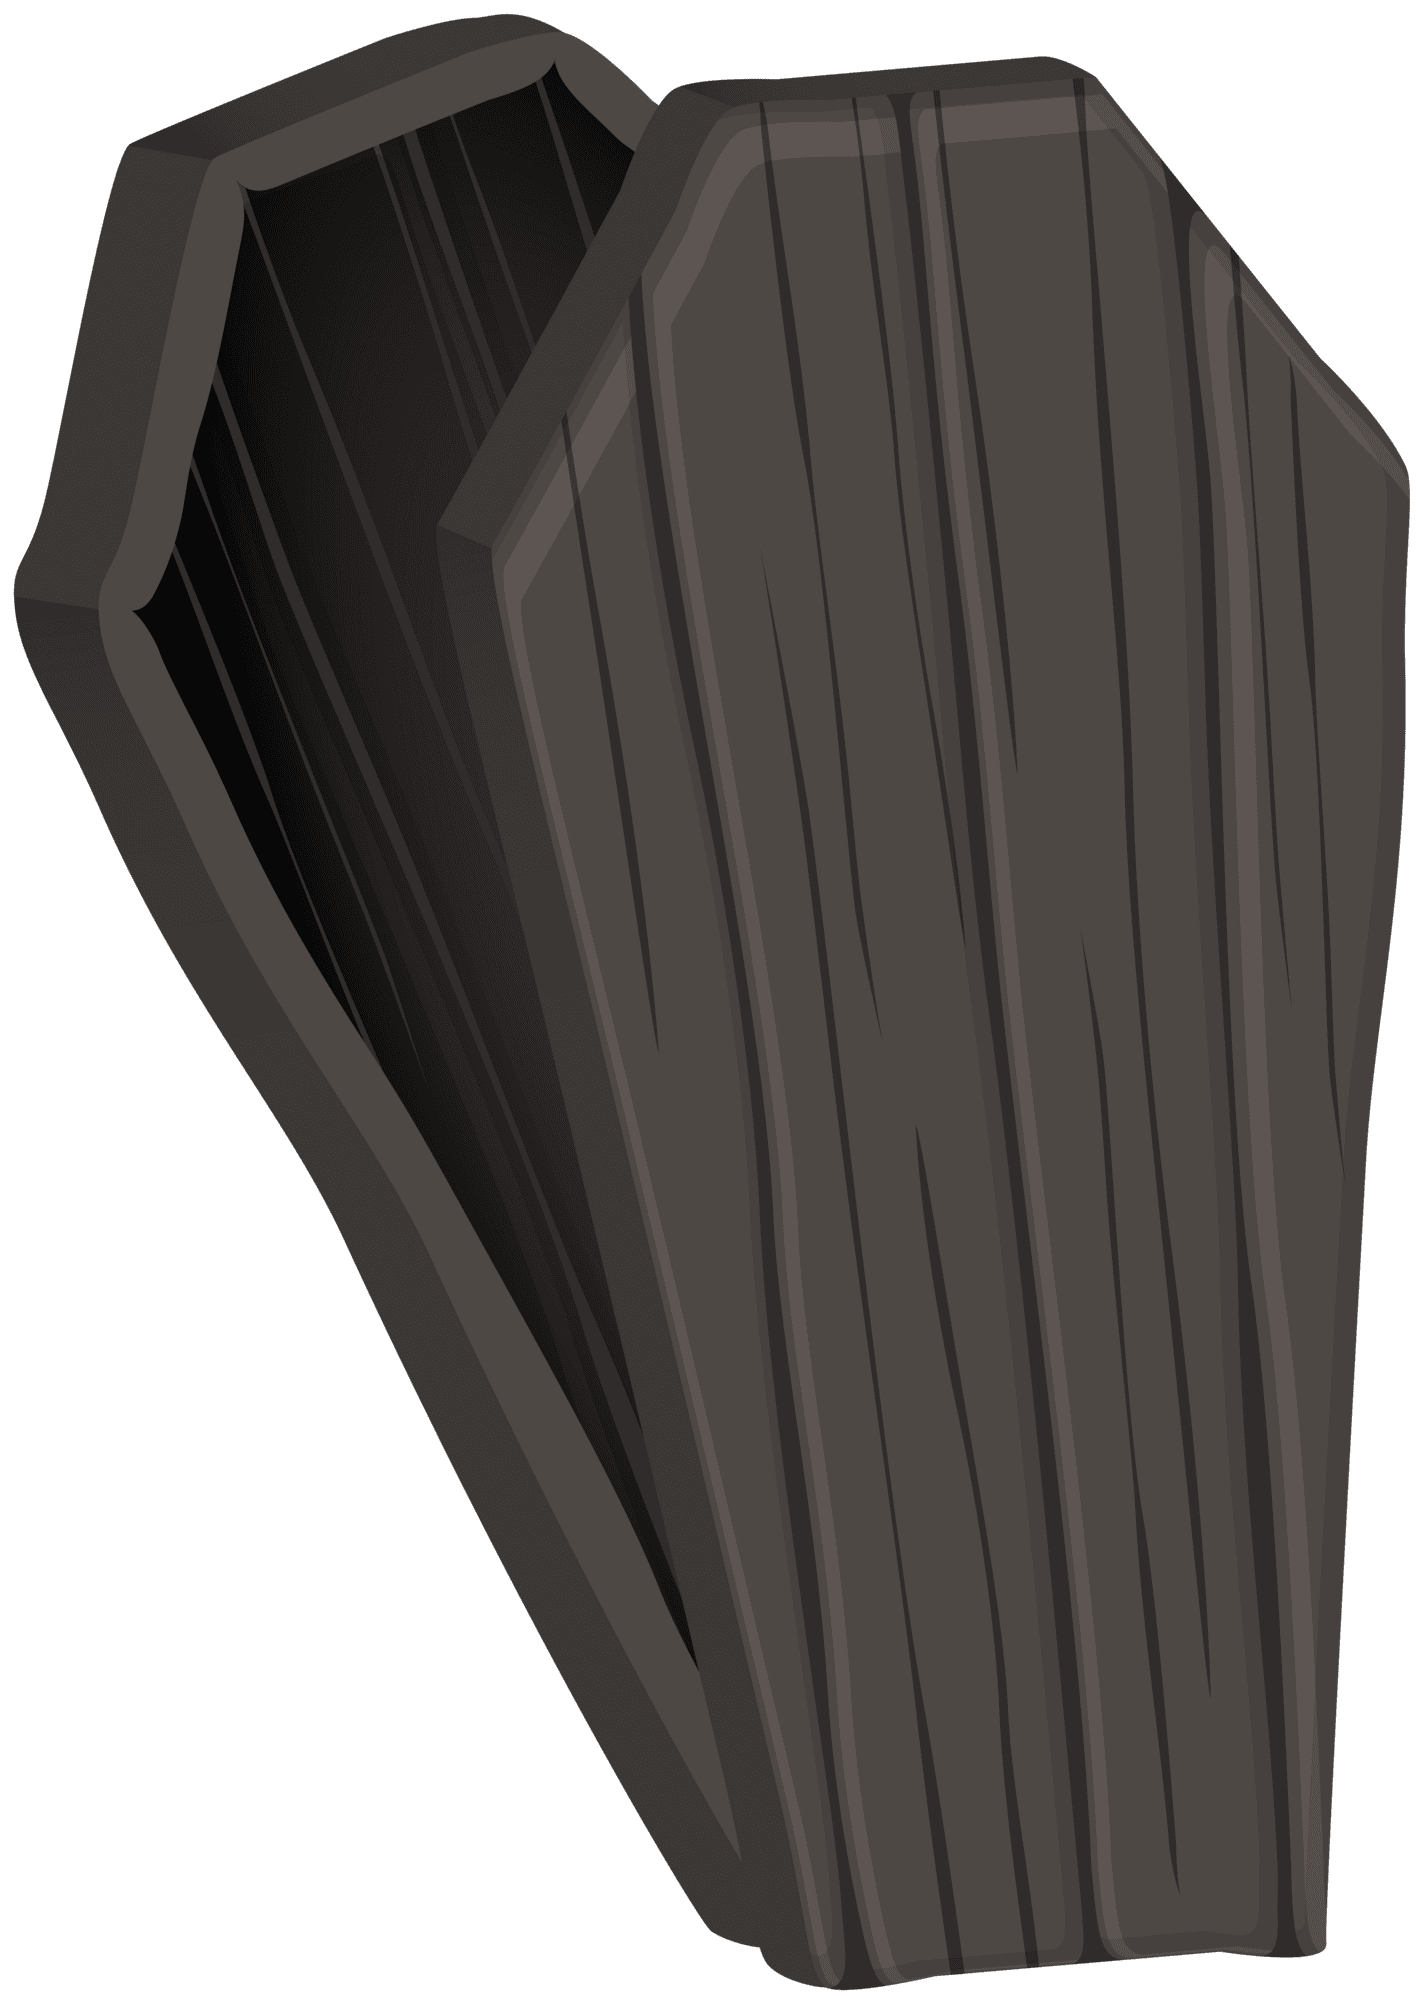 Halloween old wooden coffin clipart image